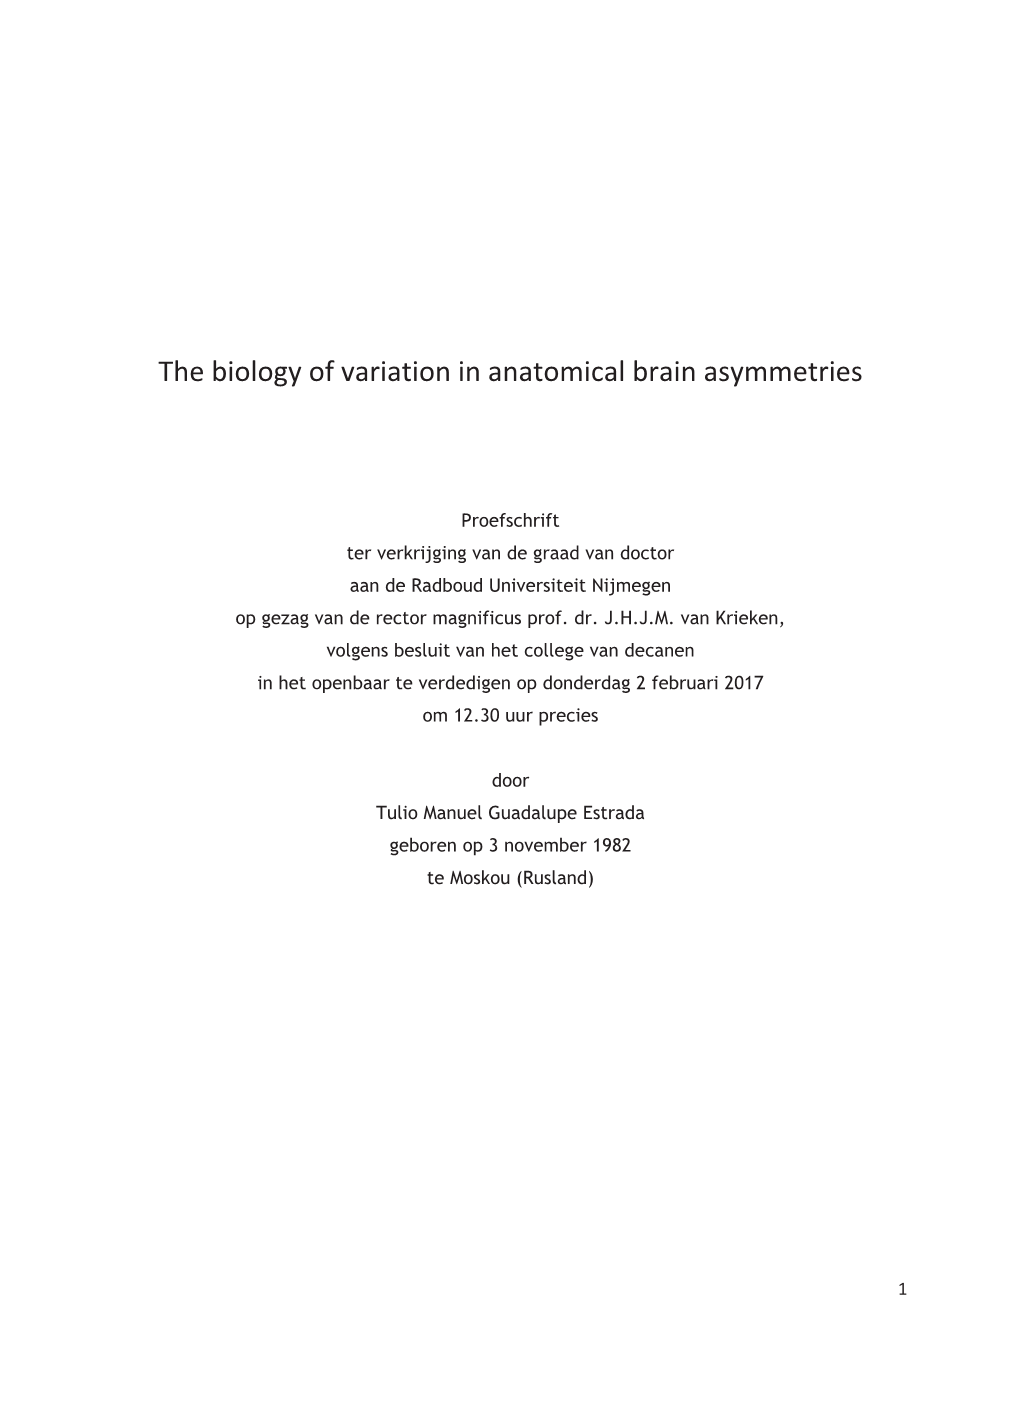 The Biology of Variation in Anatomical Brain Asymmetries